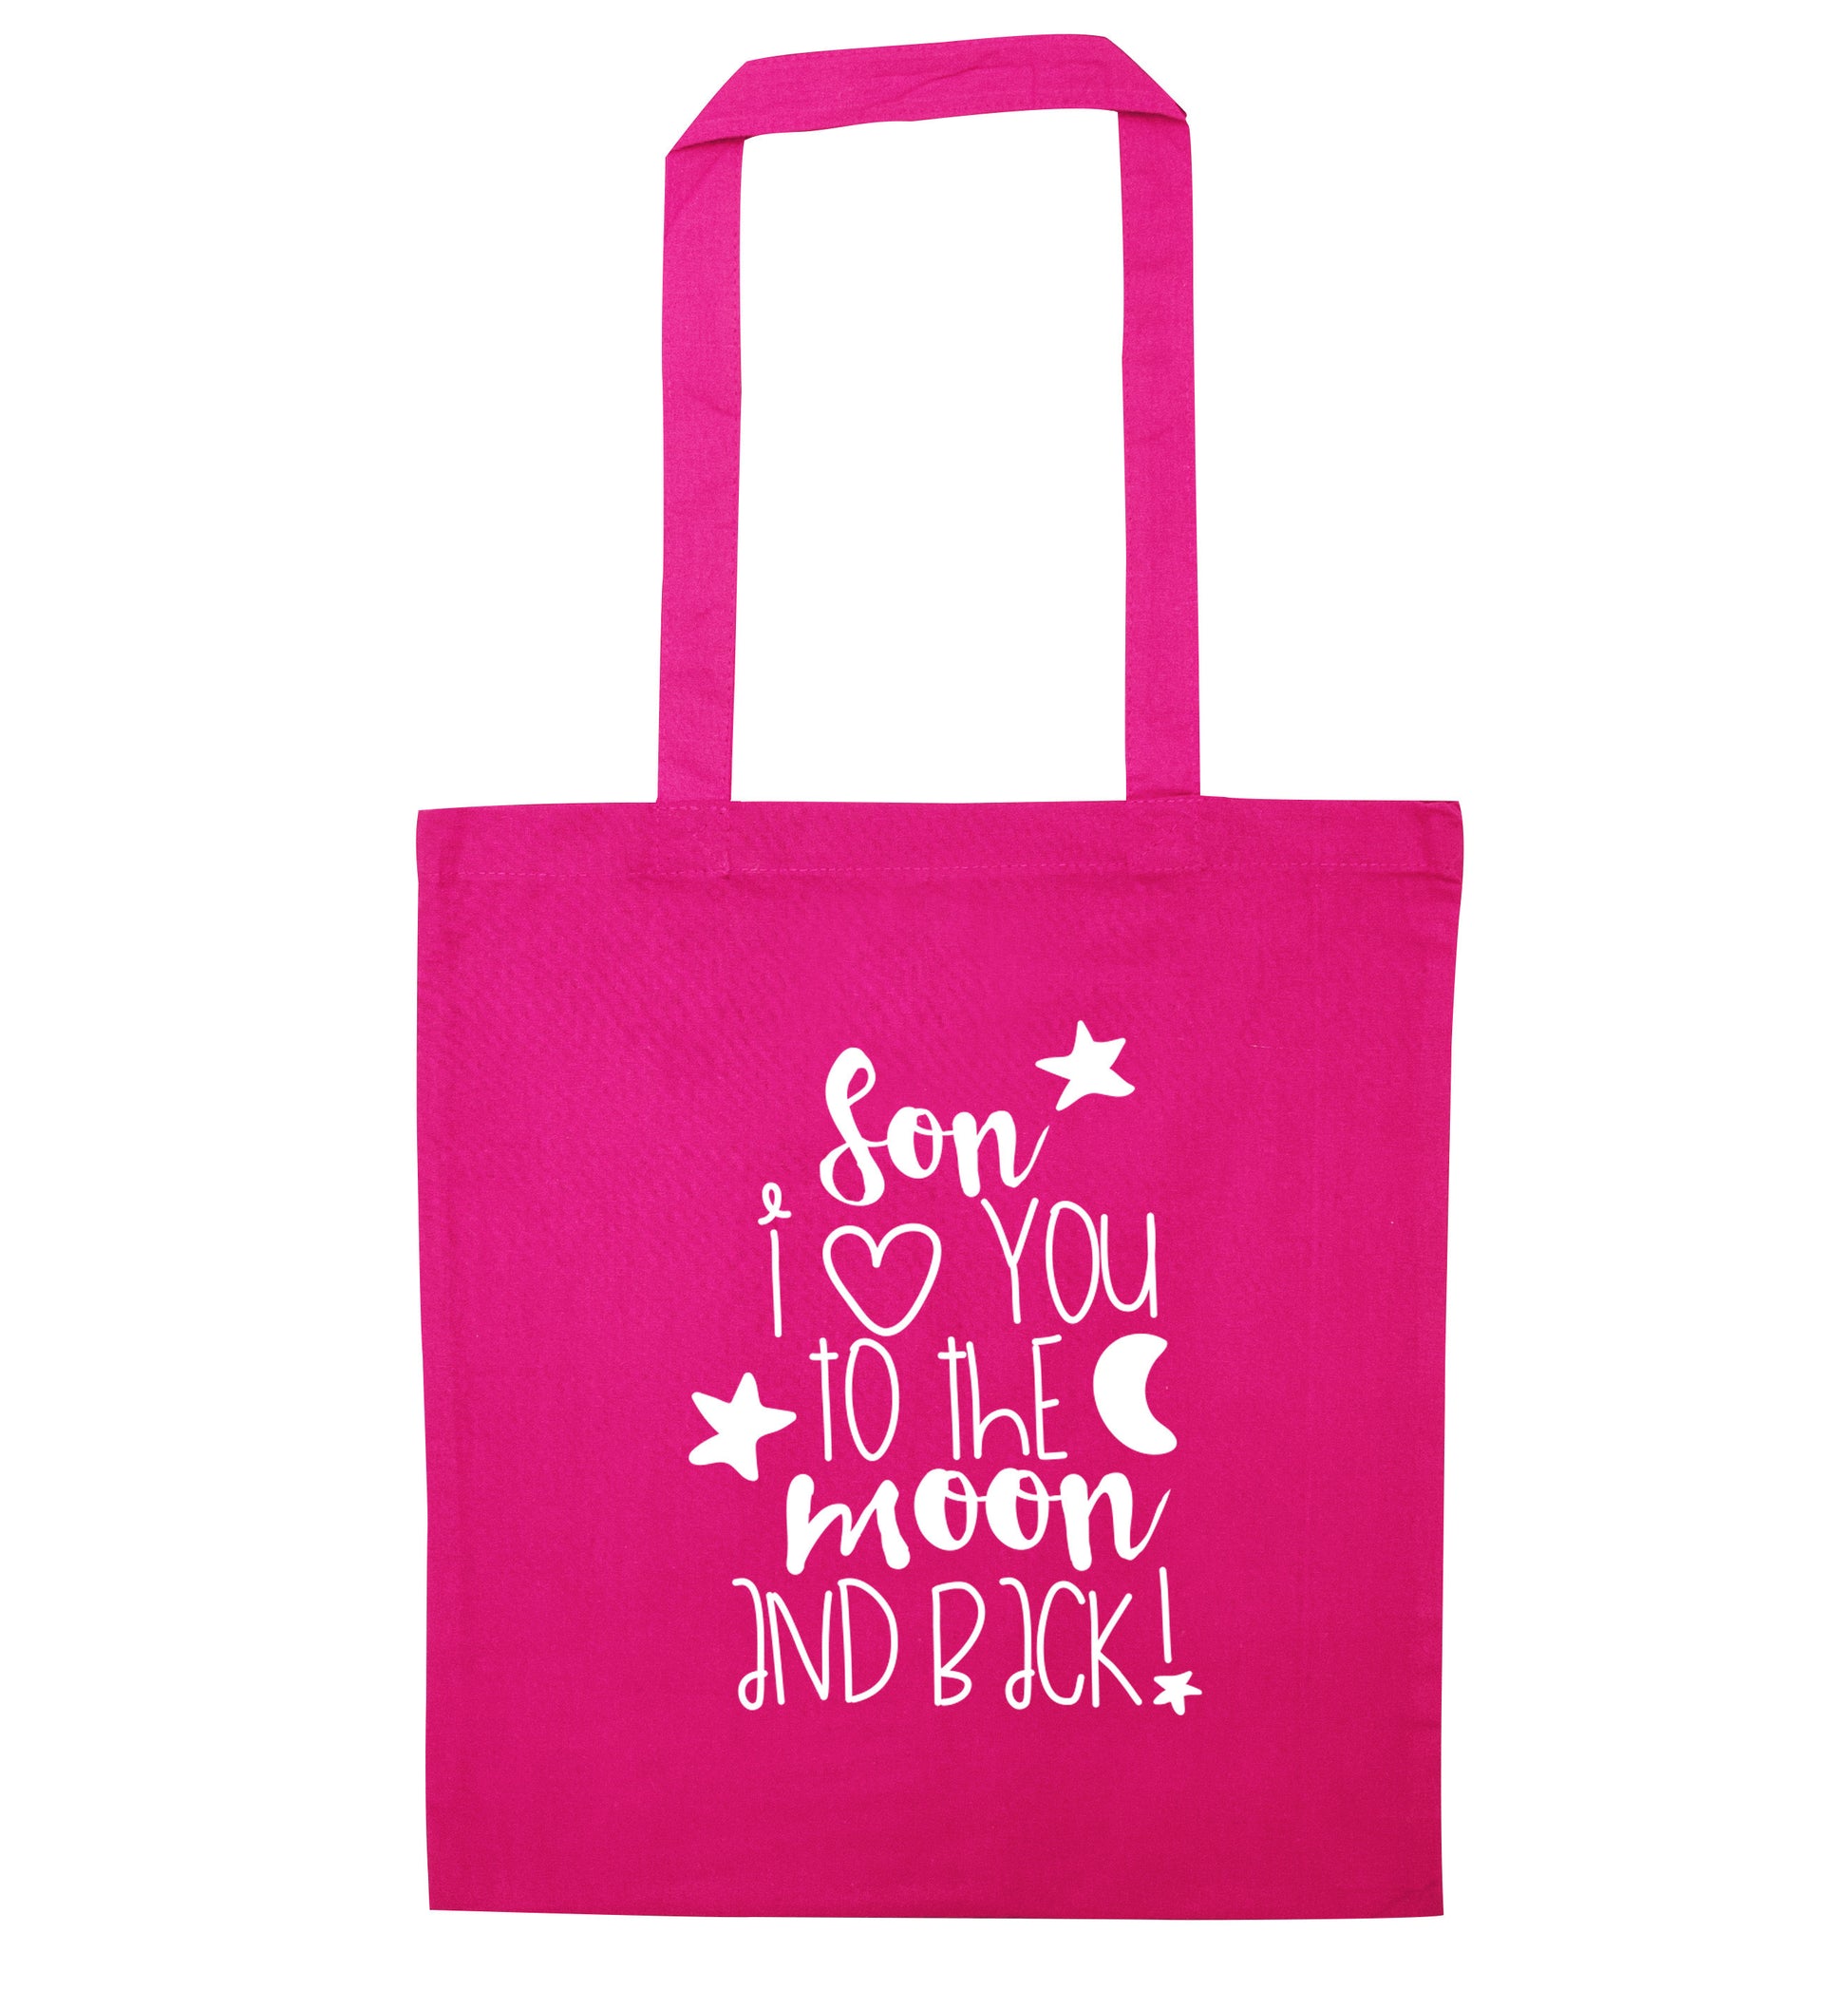 Son I love you to the moon and back pink tote bag